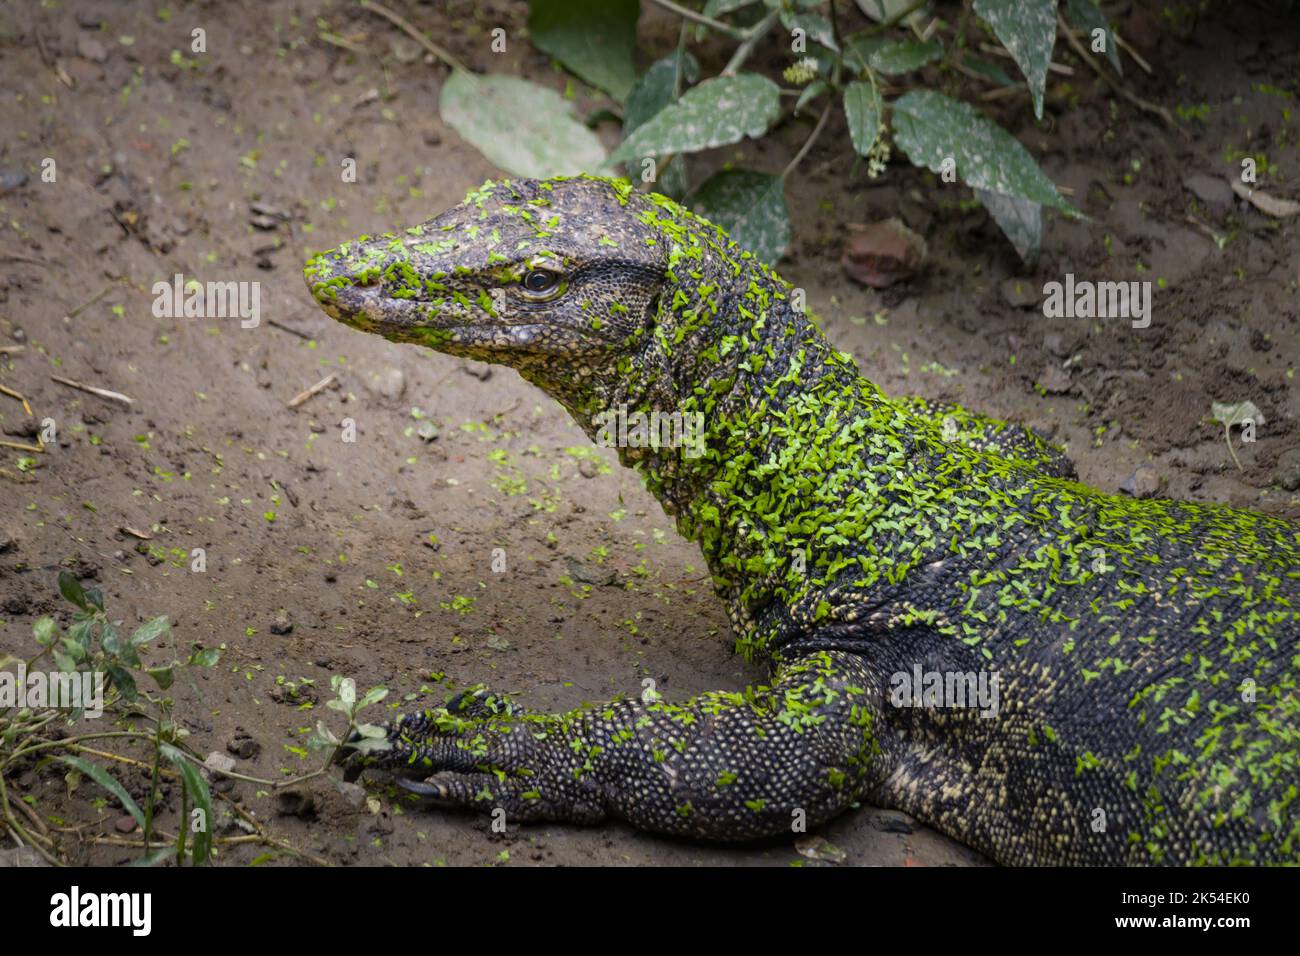 indian monitor lizard or bengal monitor basking in morning sun covered in green duckweed. Stock Photo